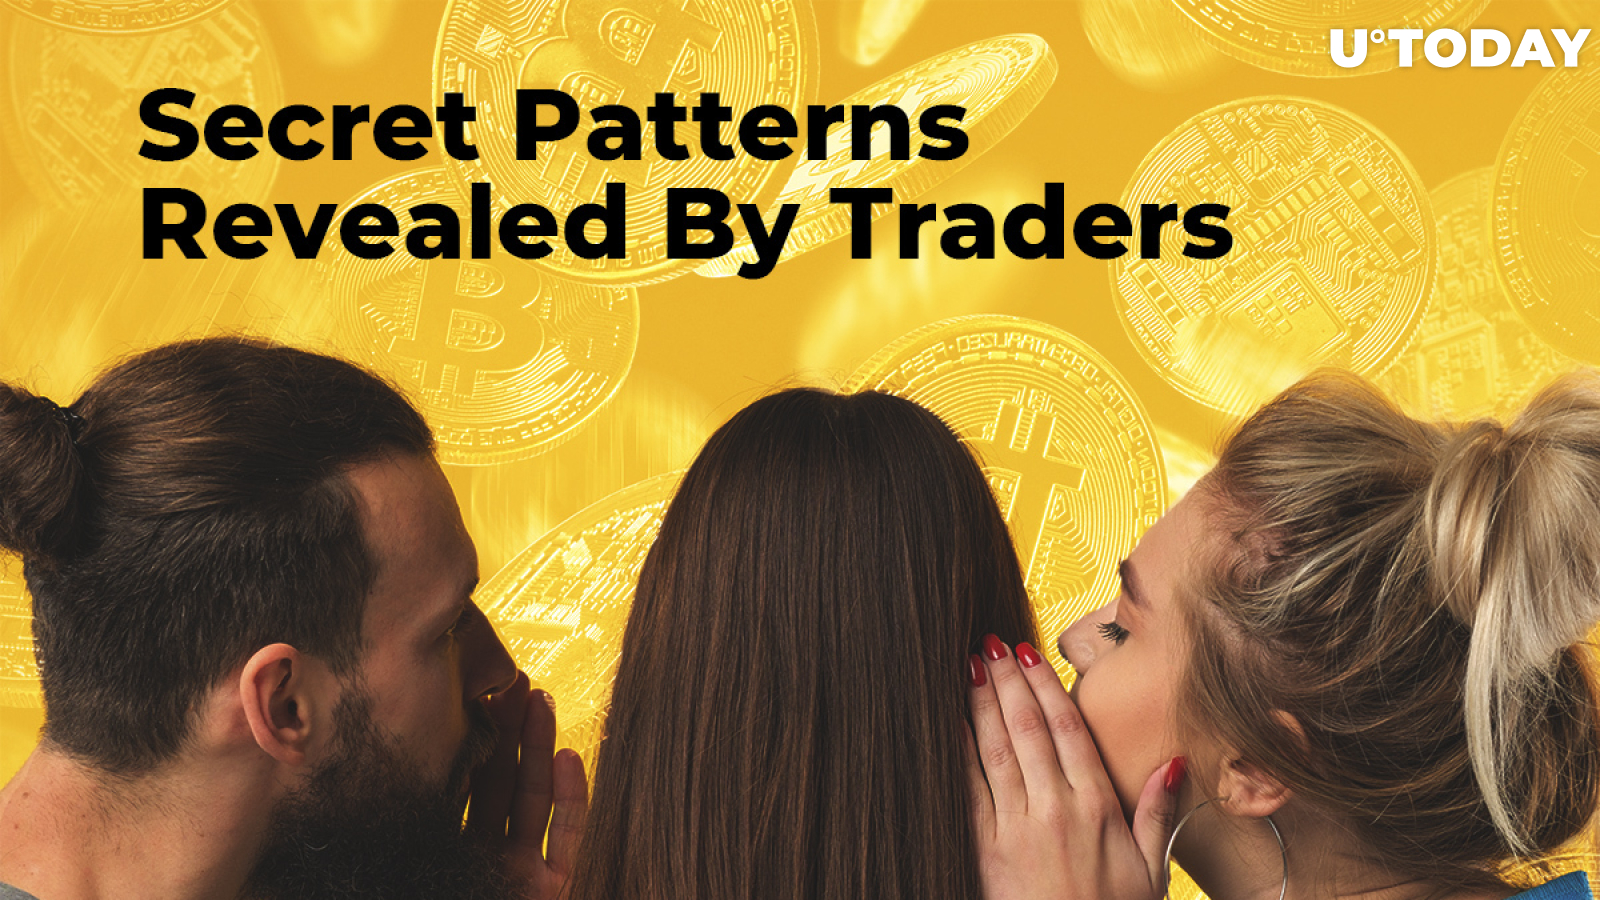 When BTC Price Can Reach $100K? Secret Patterns Revealed By Traders